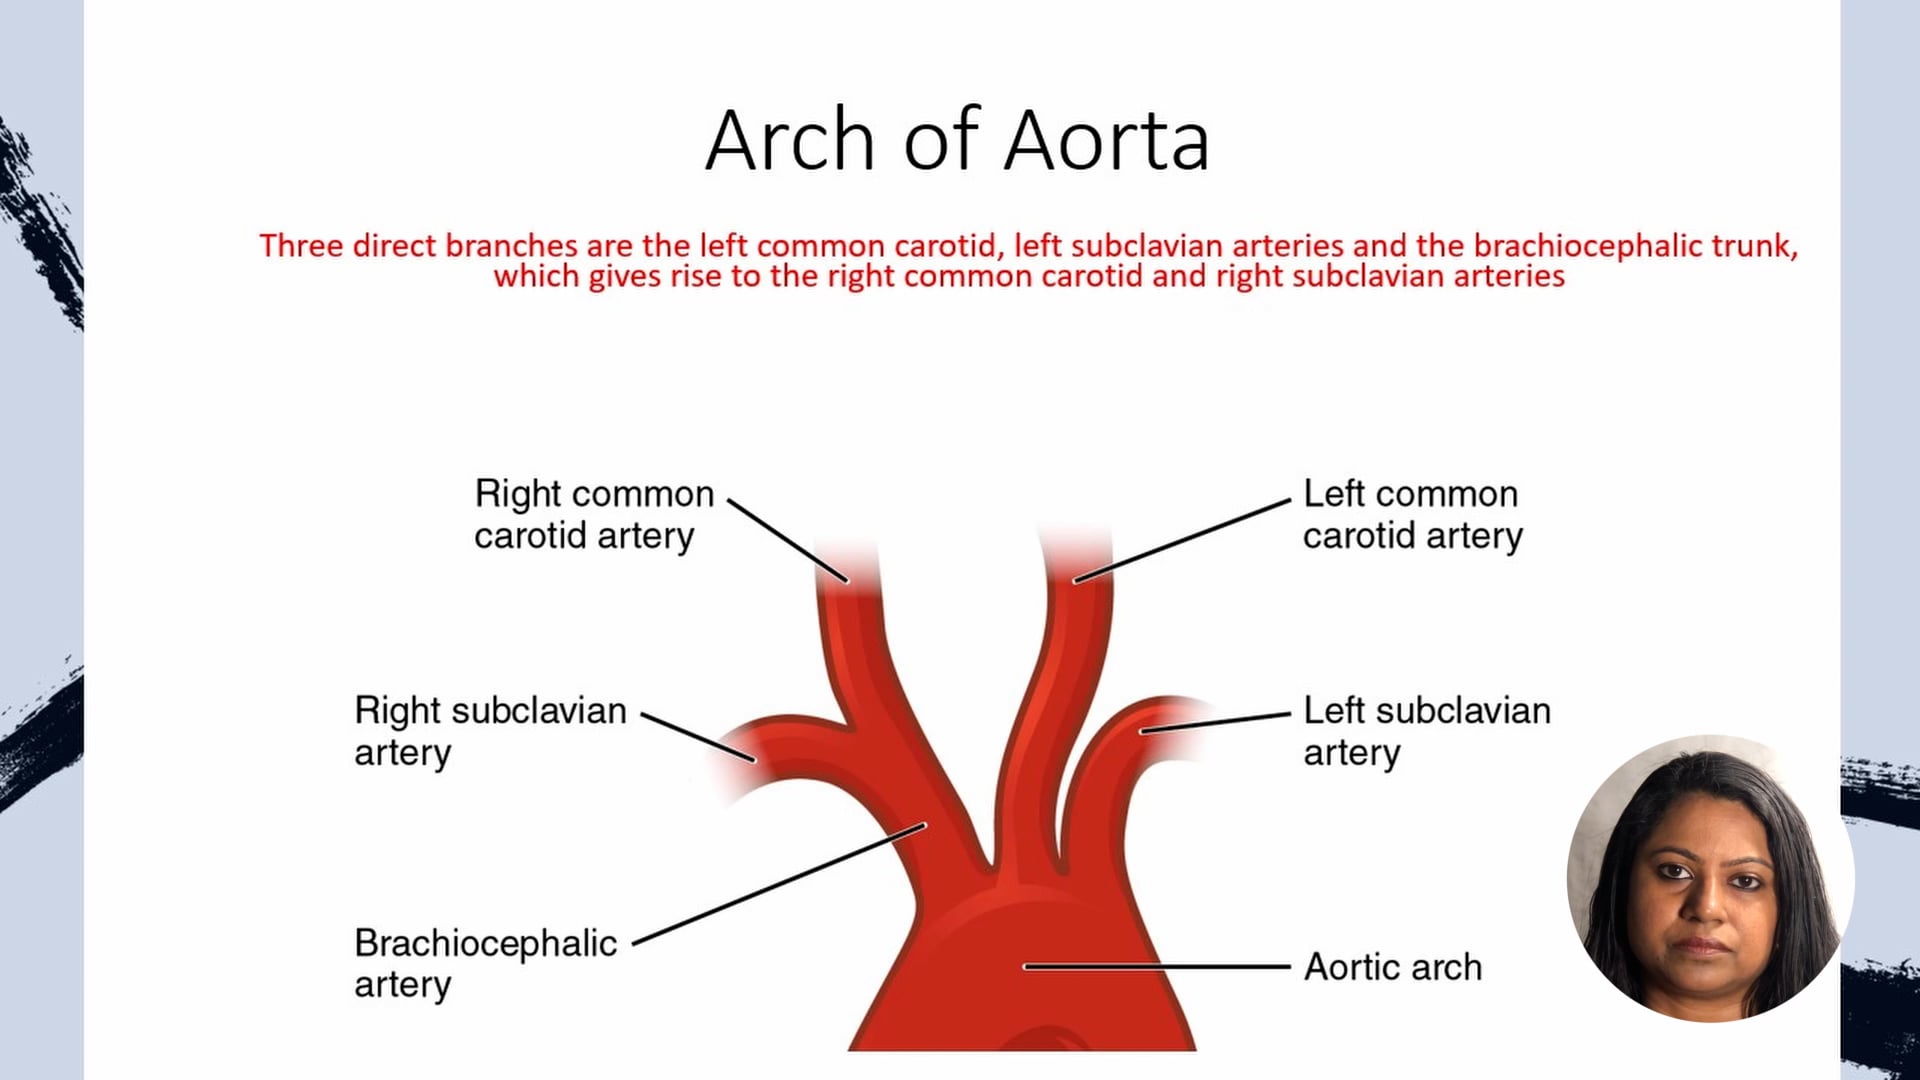 Aorta and branches